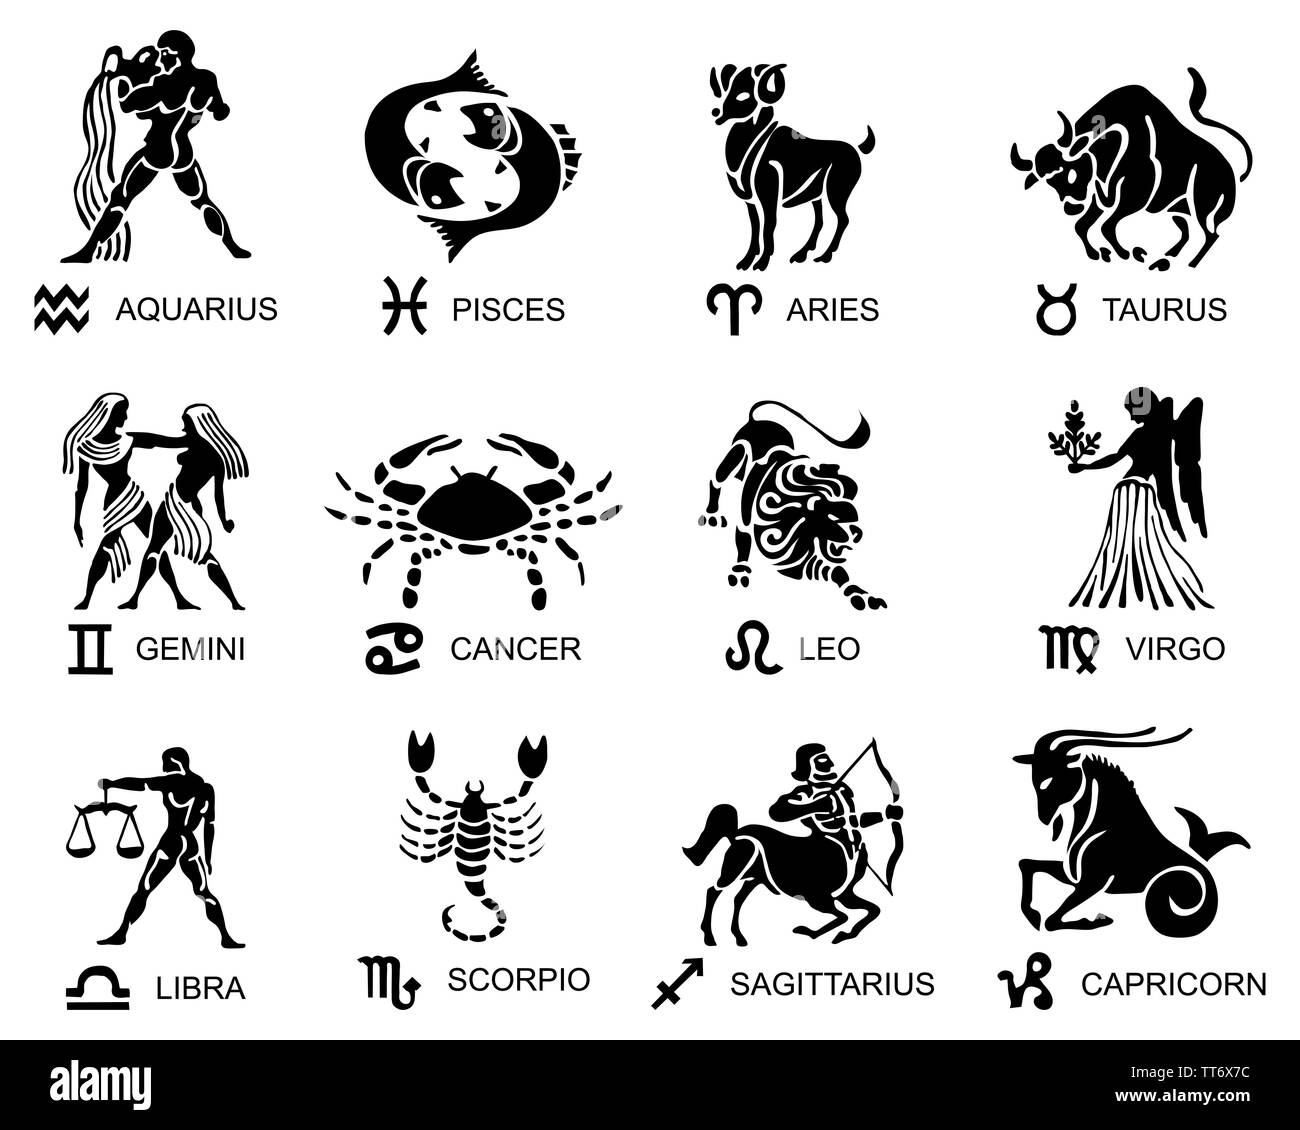 Black silhouette of zodiac signs on a white background Stock Photo